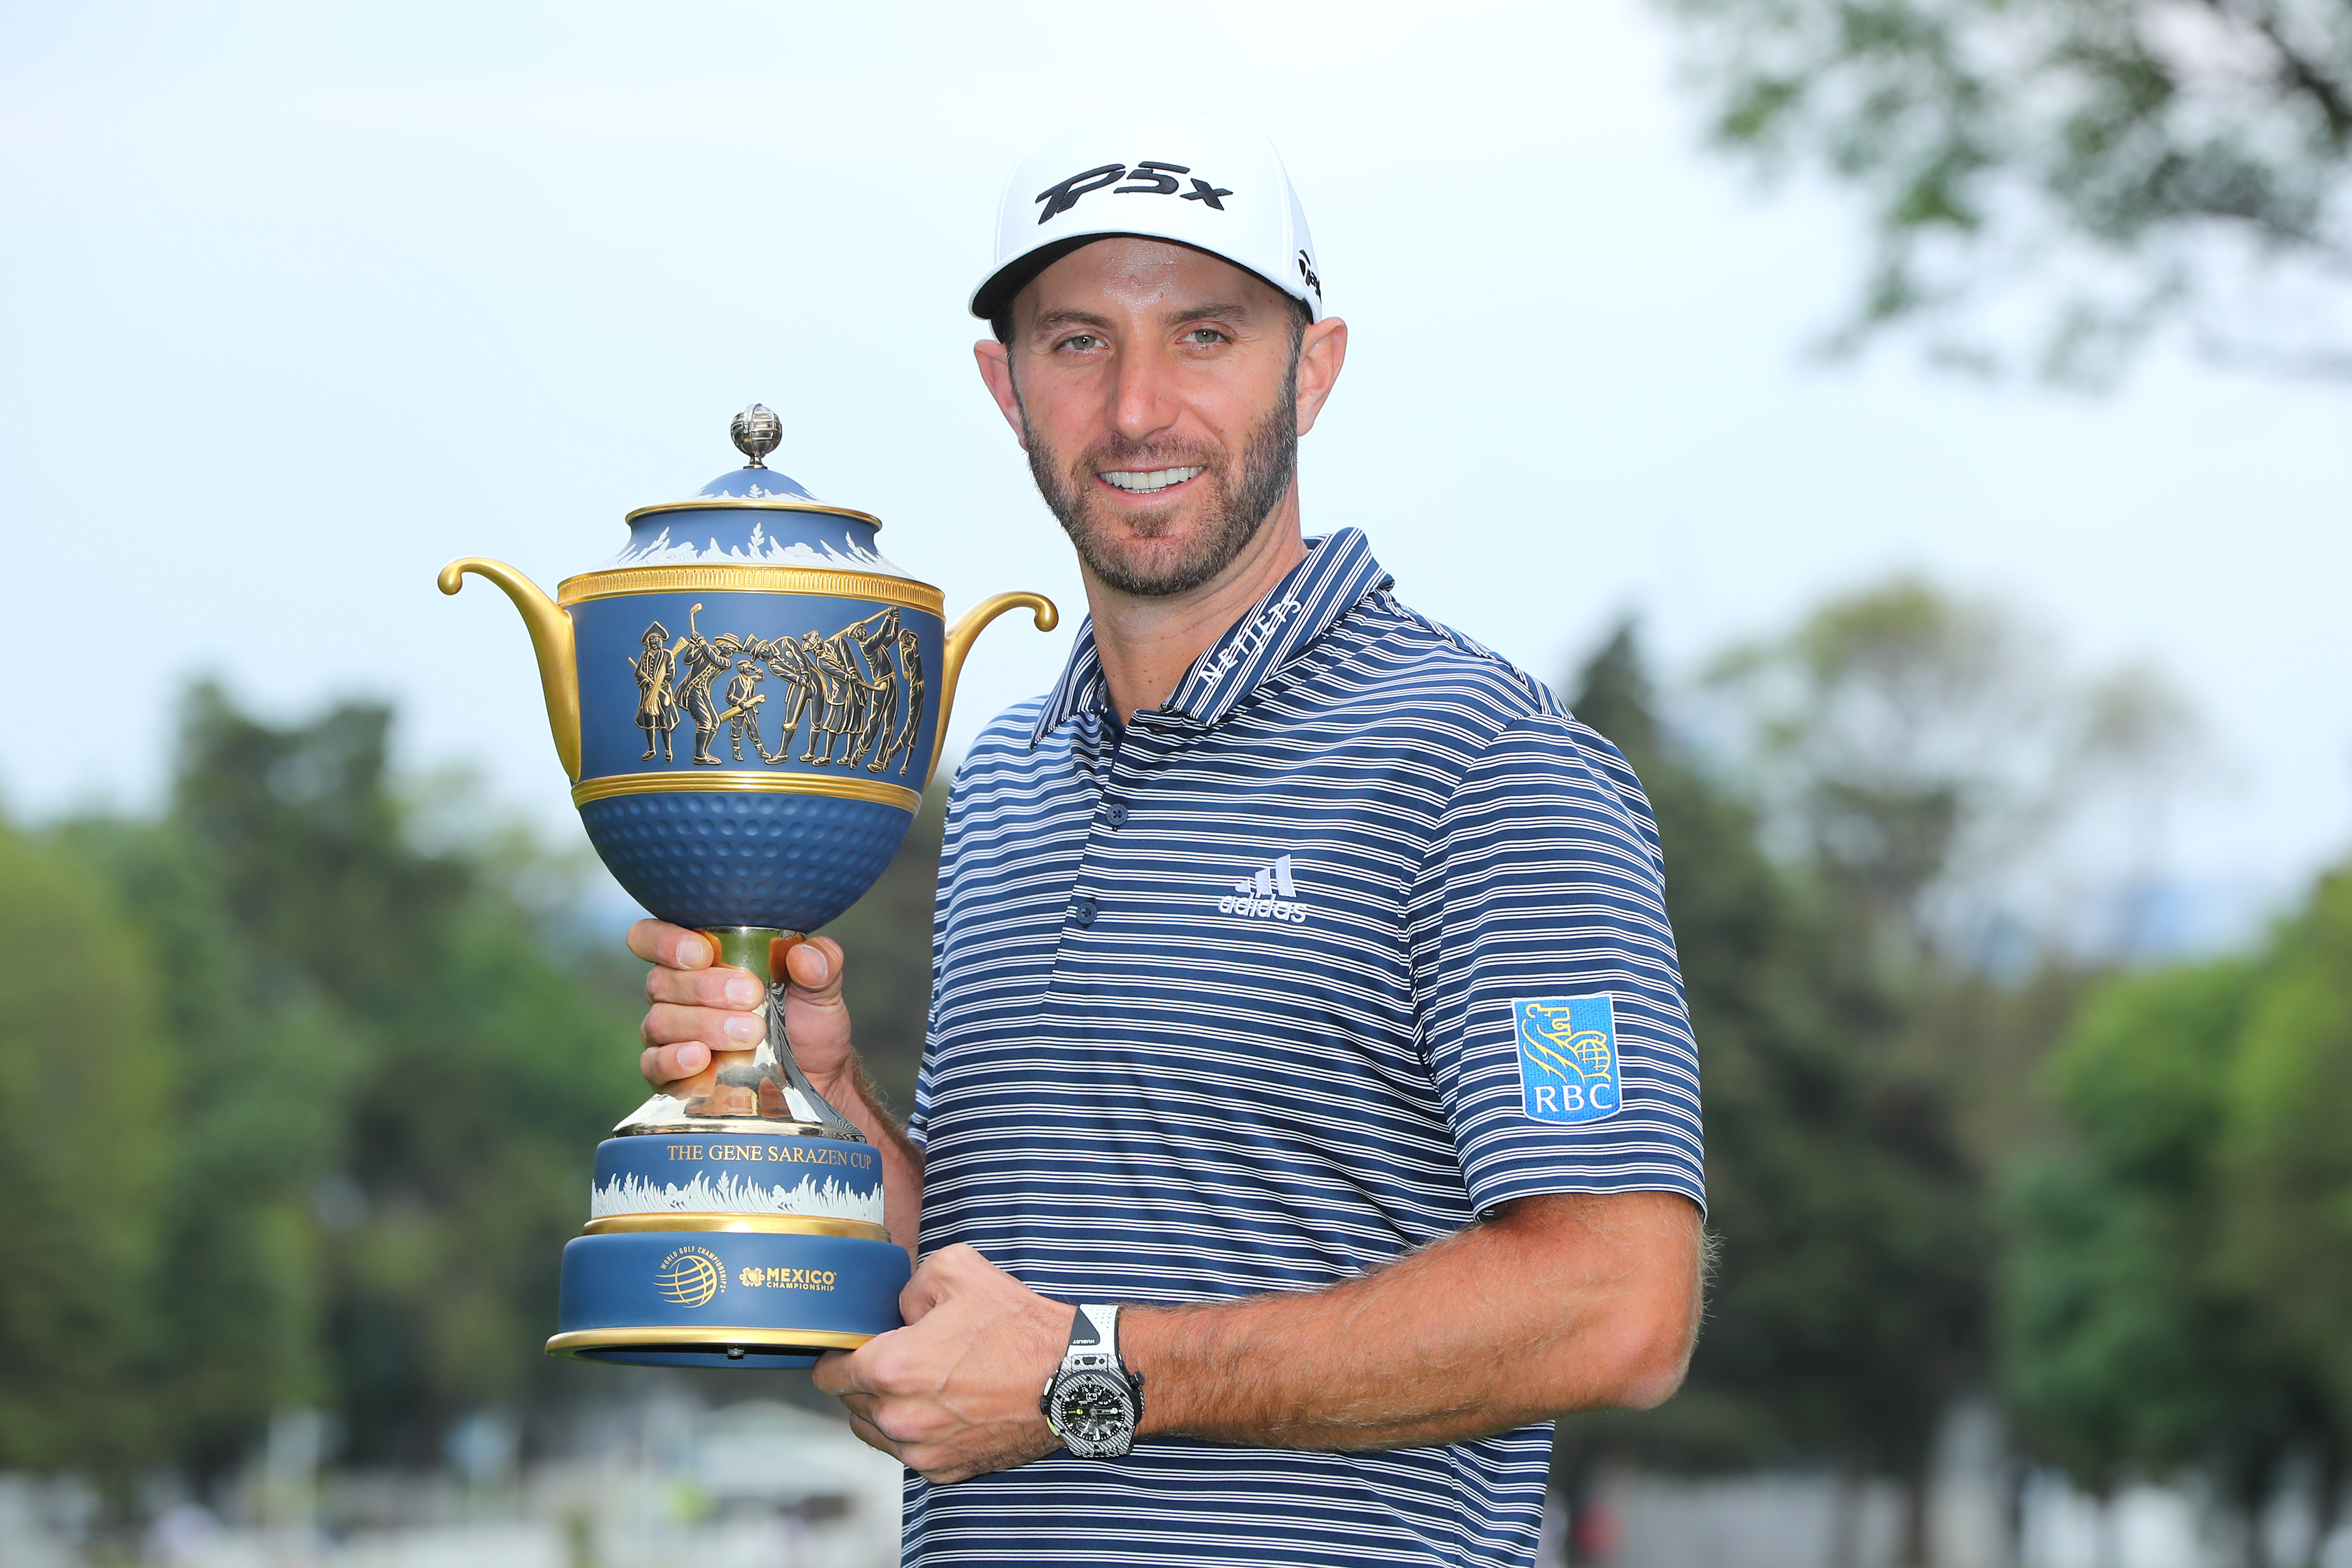 Dustin Johnson wins WGC, but everyone is talking about his dodgy drop!